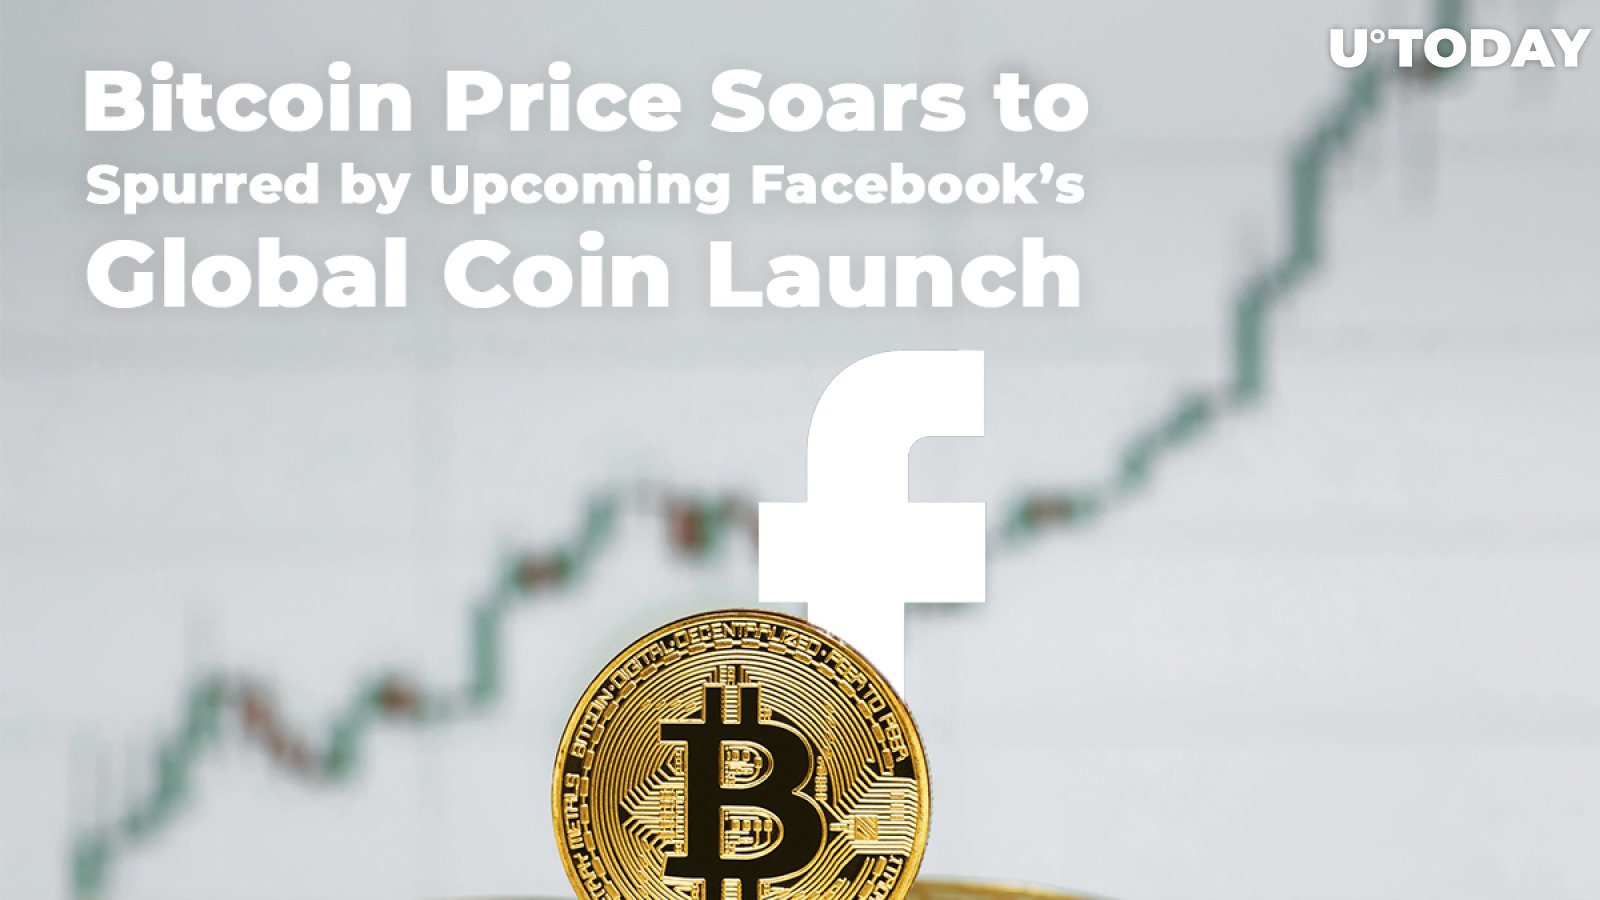 Bitcoin Price Soars to New YTD High of $9,000 Spurred by Facebook’s Upcoming GlobalCoin Launch